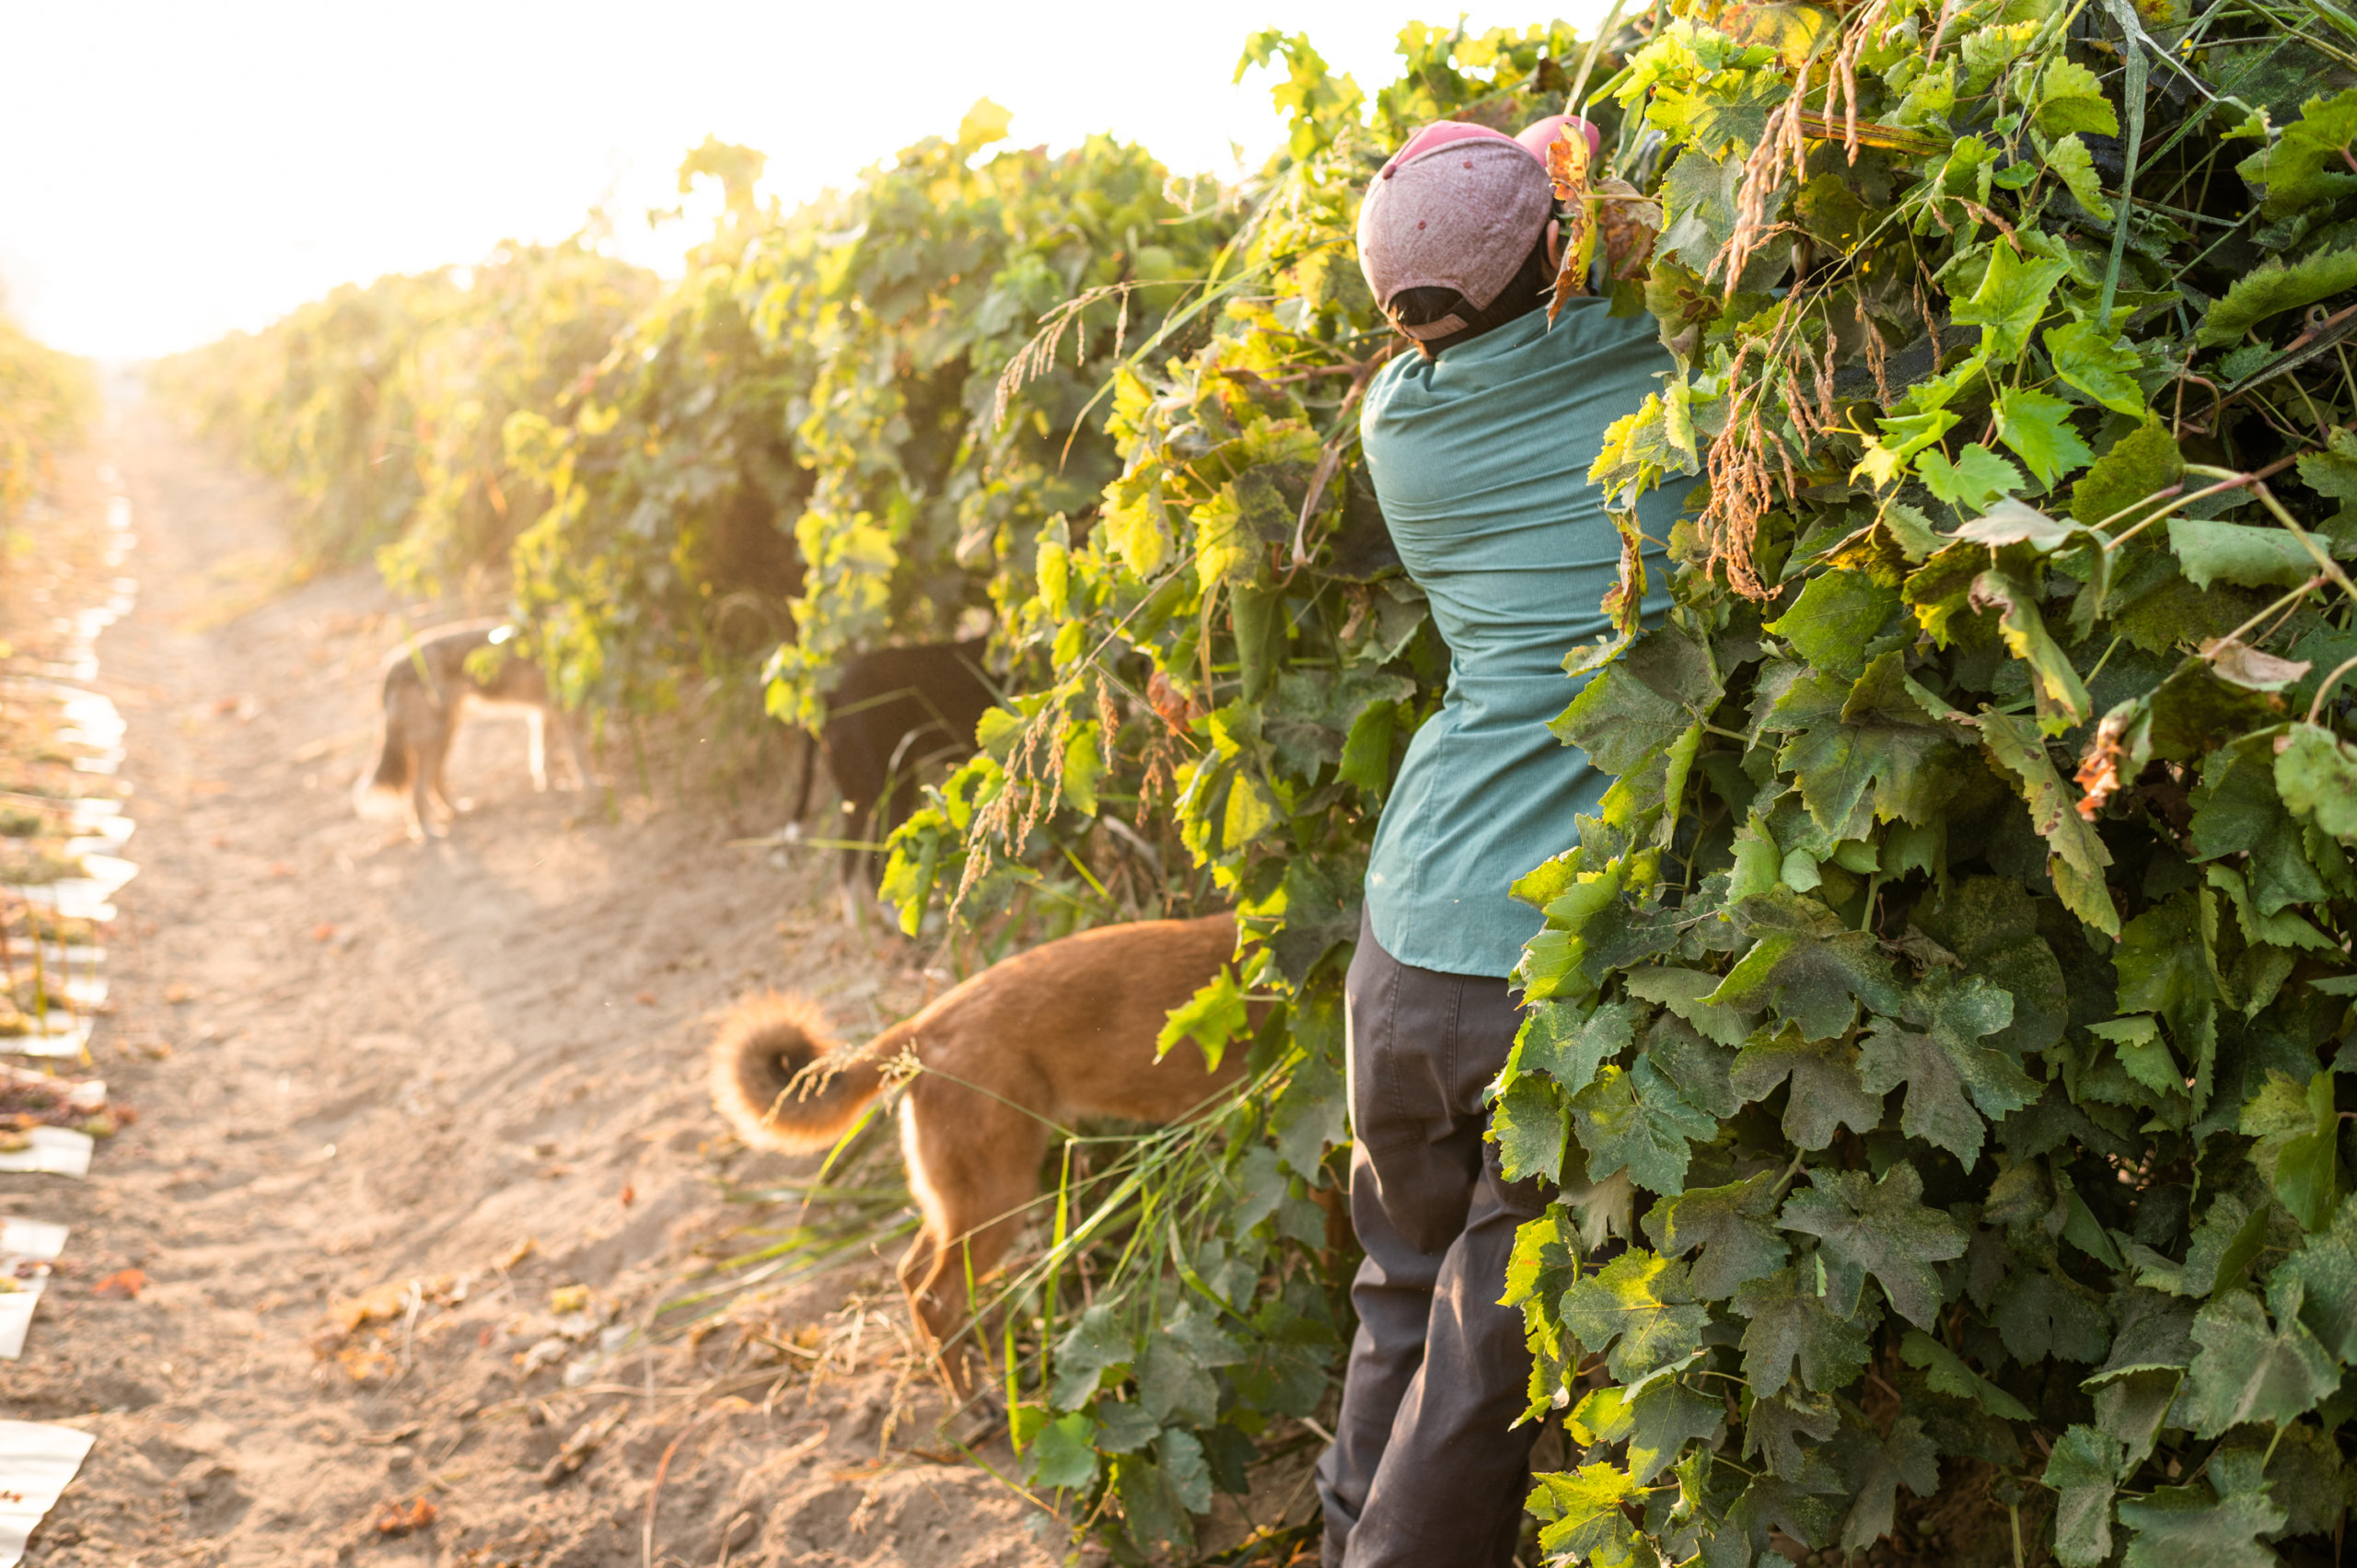 Nikiko, with the help of three farm dogs, reaches in to the vines in search for grapes